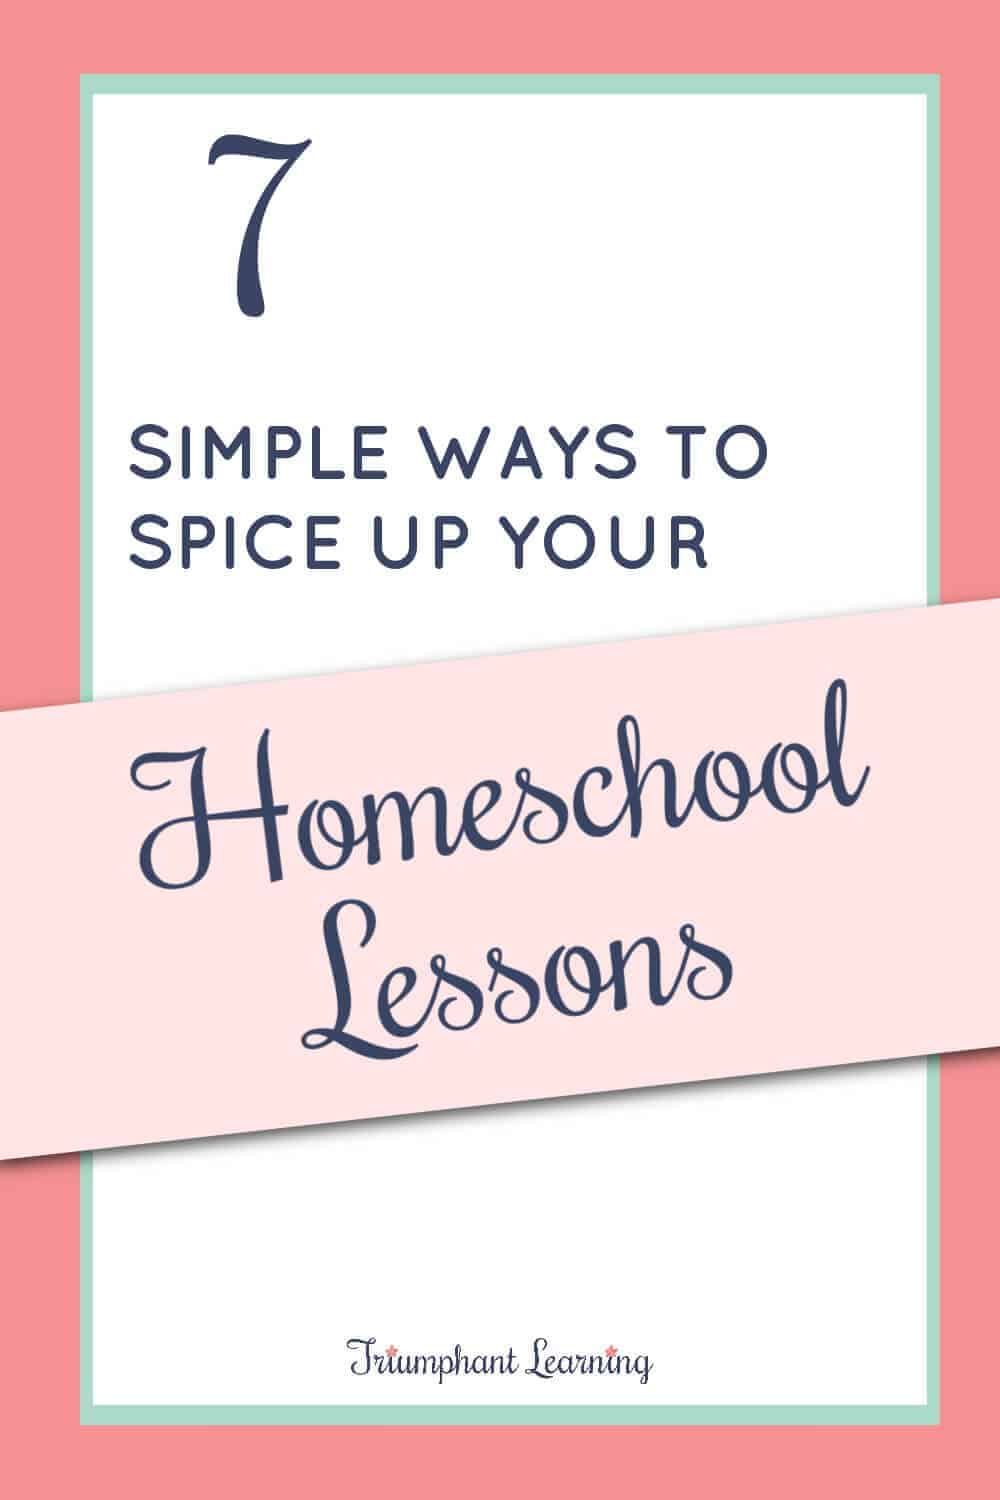 Want your children to look forward to school time? Learn how you can spice up your homeschool lessons without overwhelming your schedule. via @TriLearning